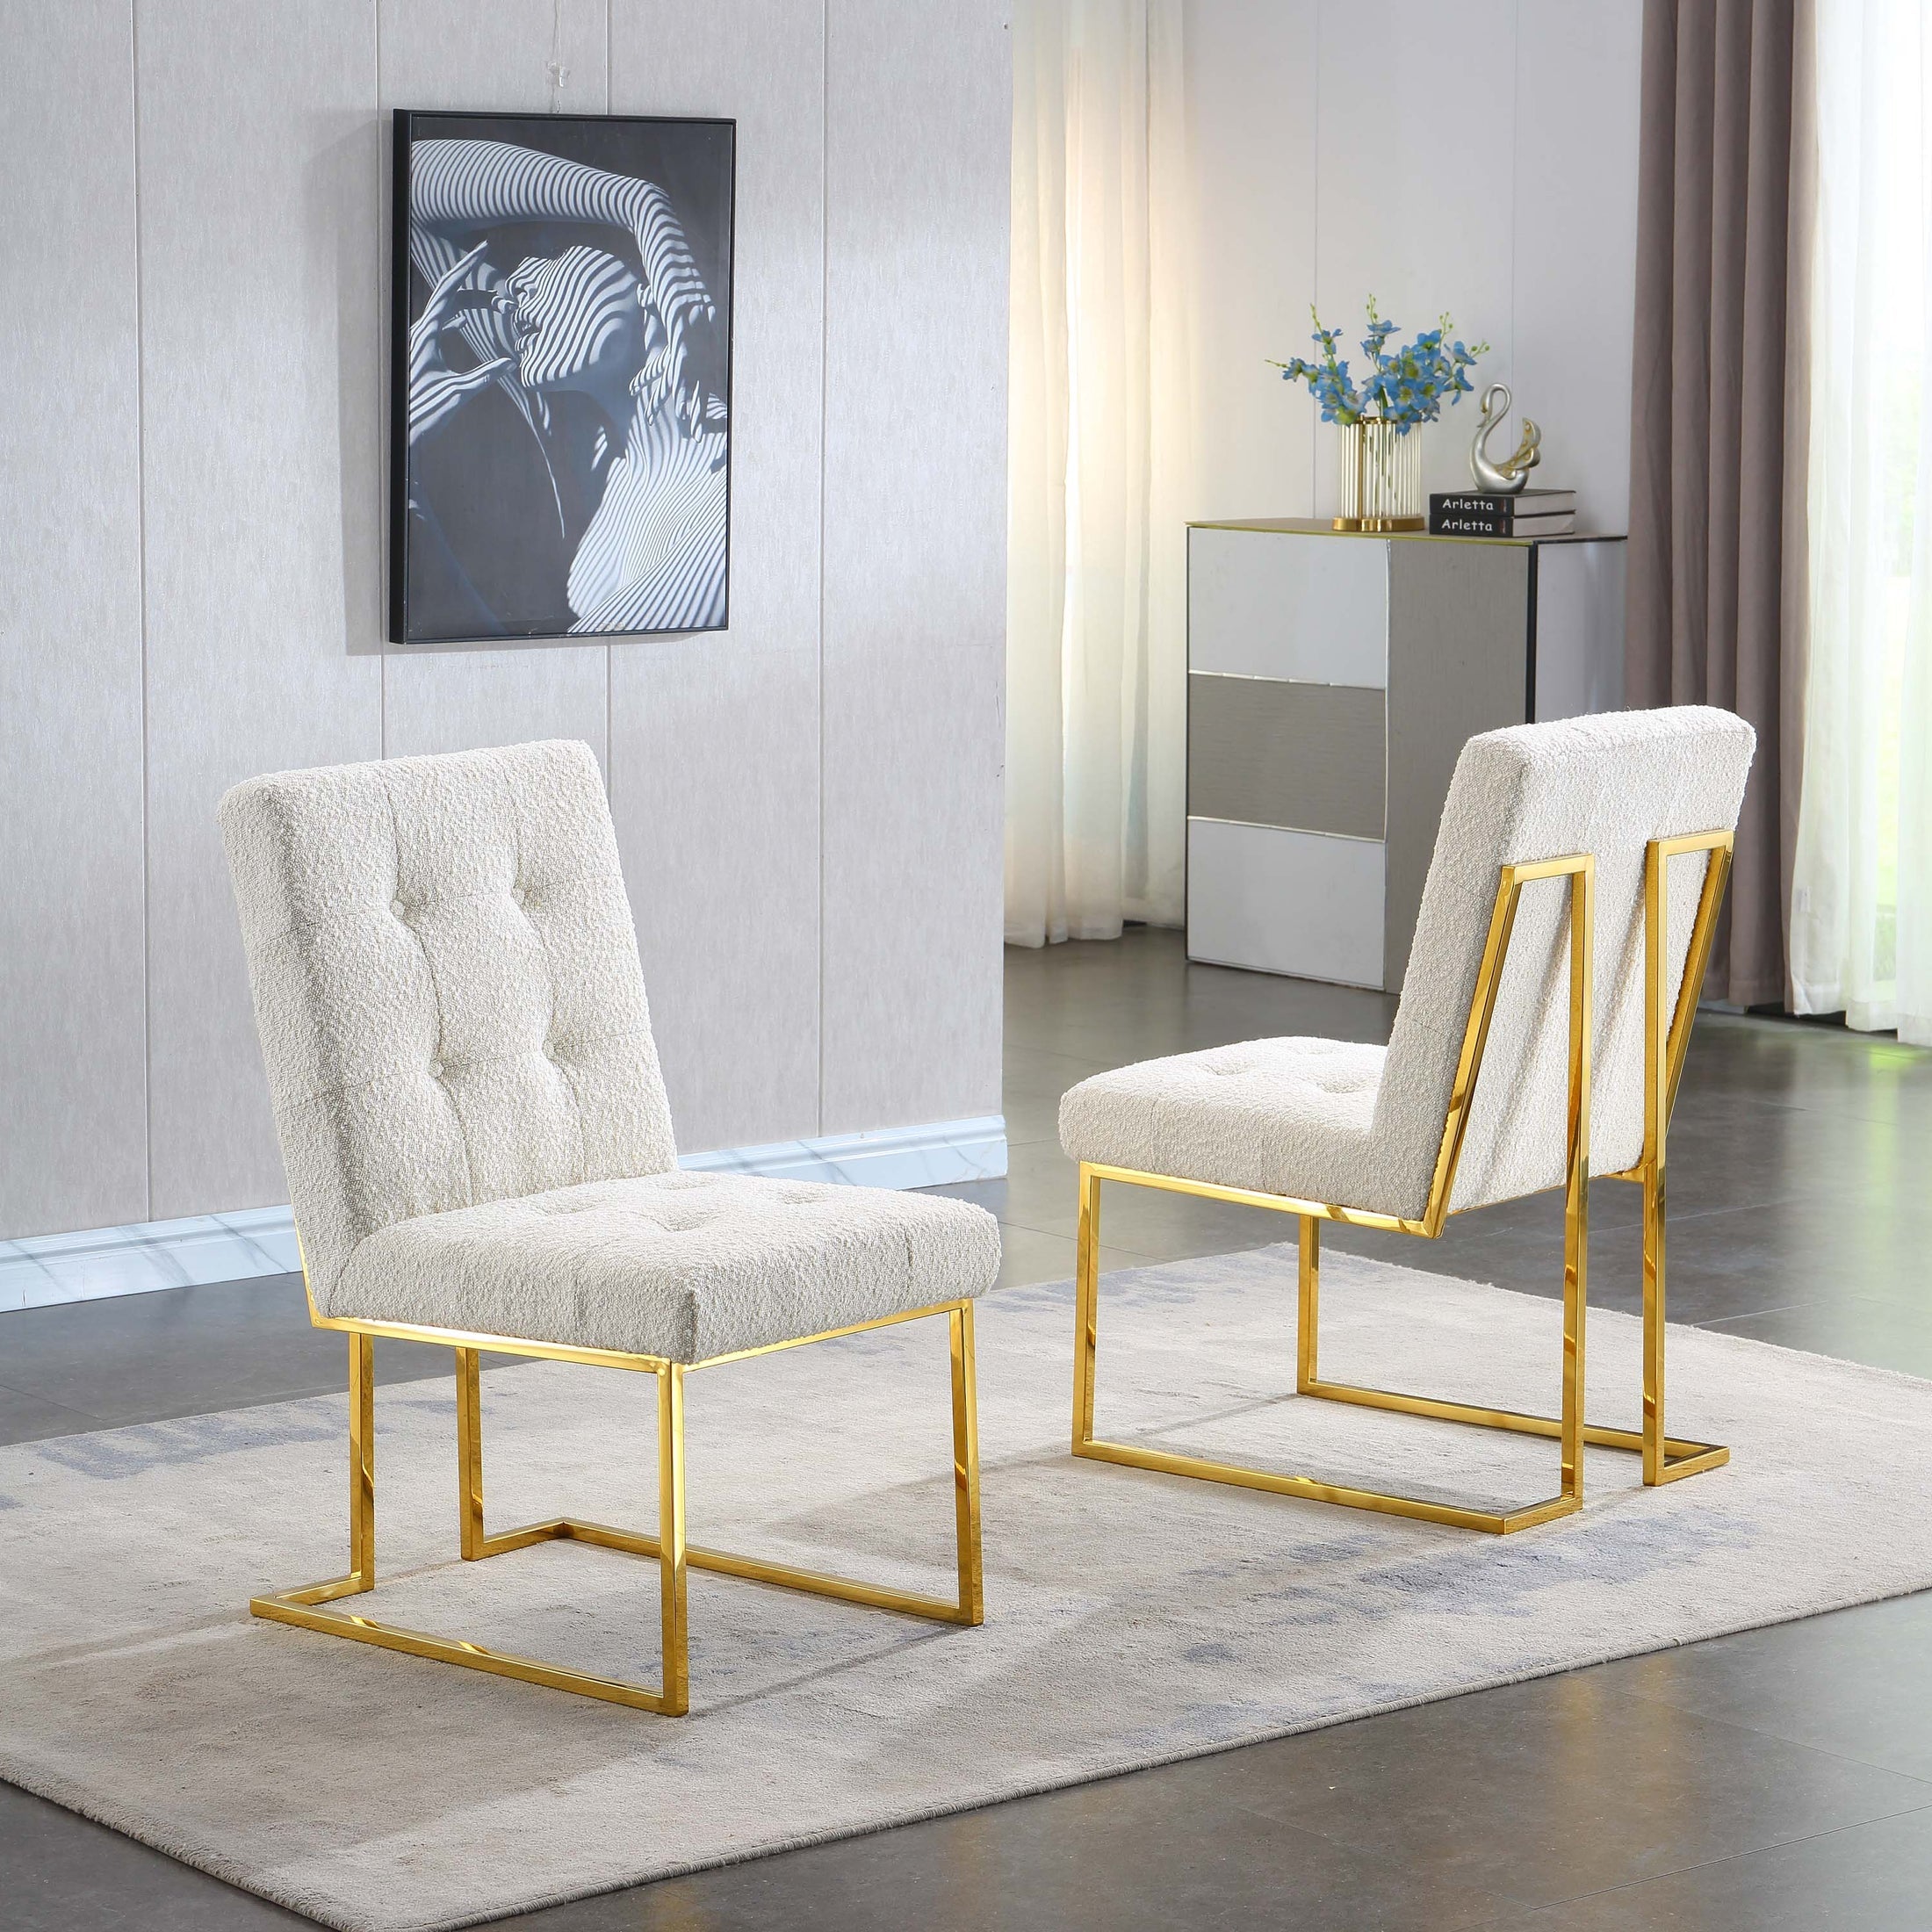 Chesmore Dining Chair White Set of 2